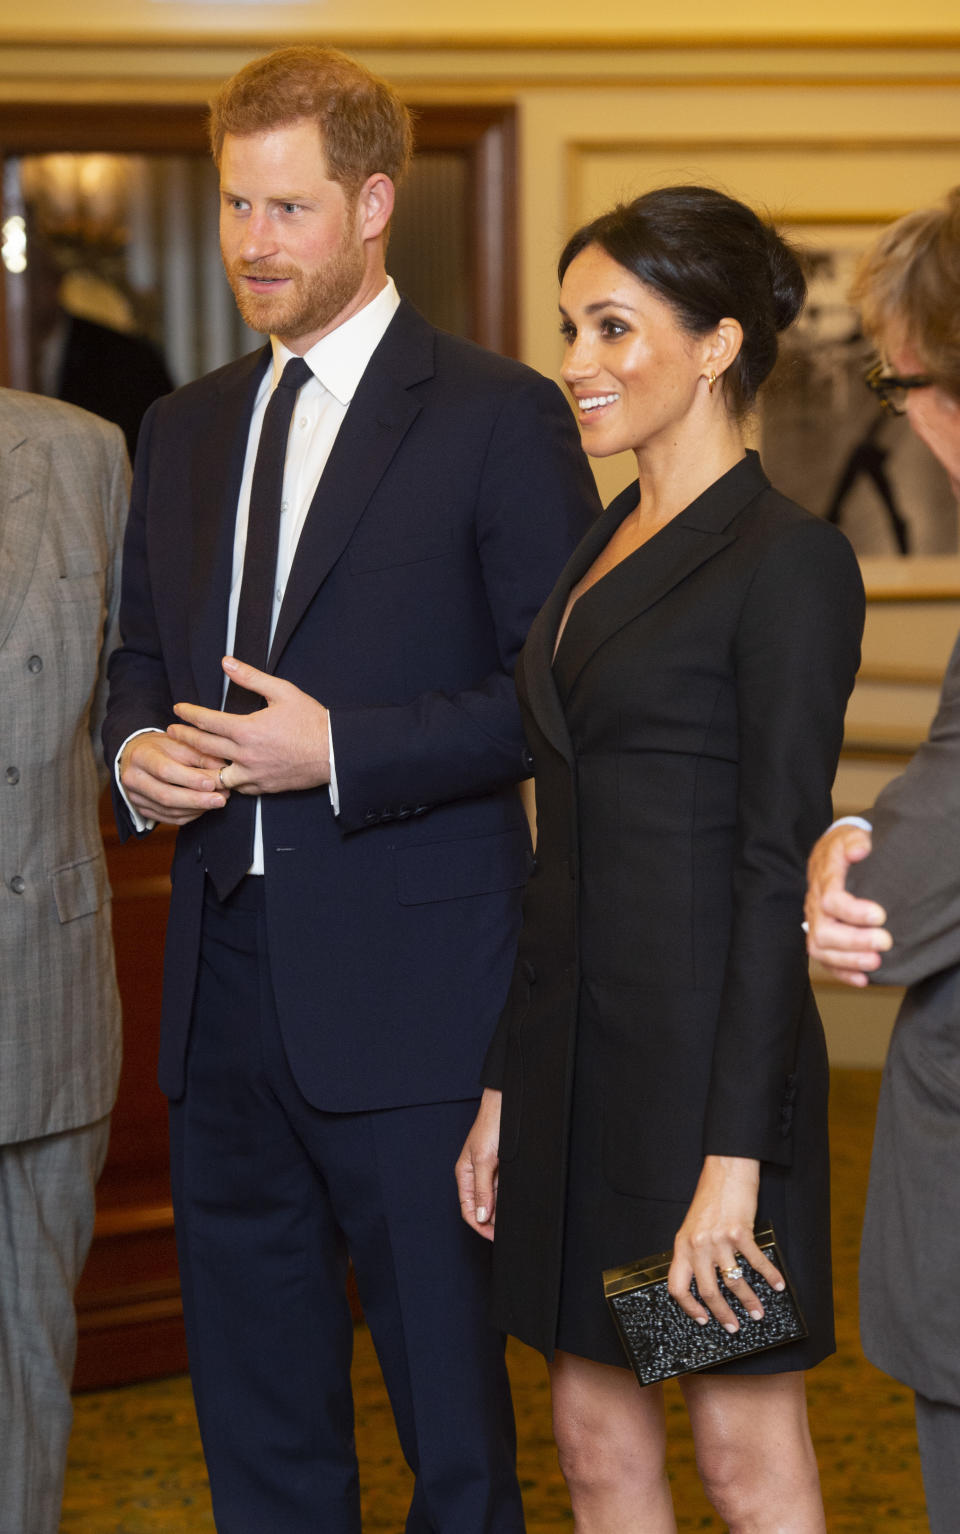 It was a flashback to the Duchess of Sussex’s acting days when she regularly wore mini dresses. Photo: Getty